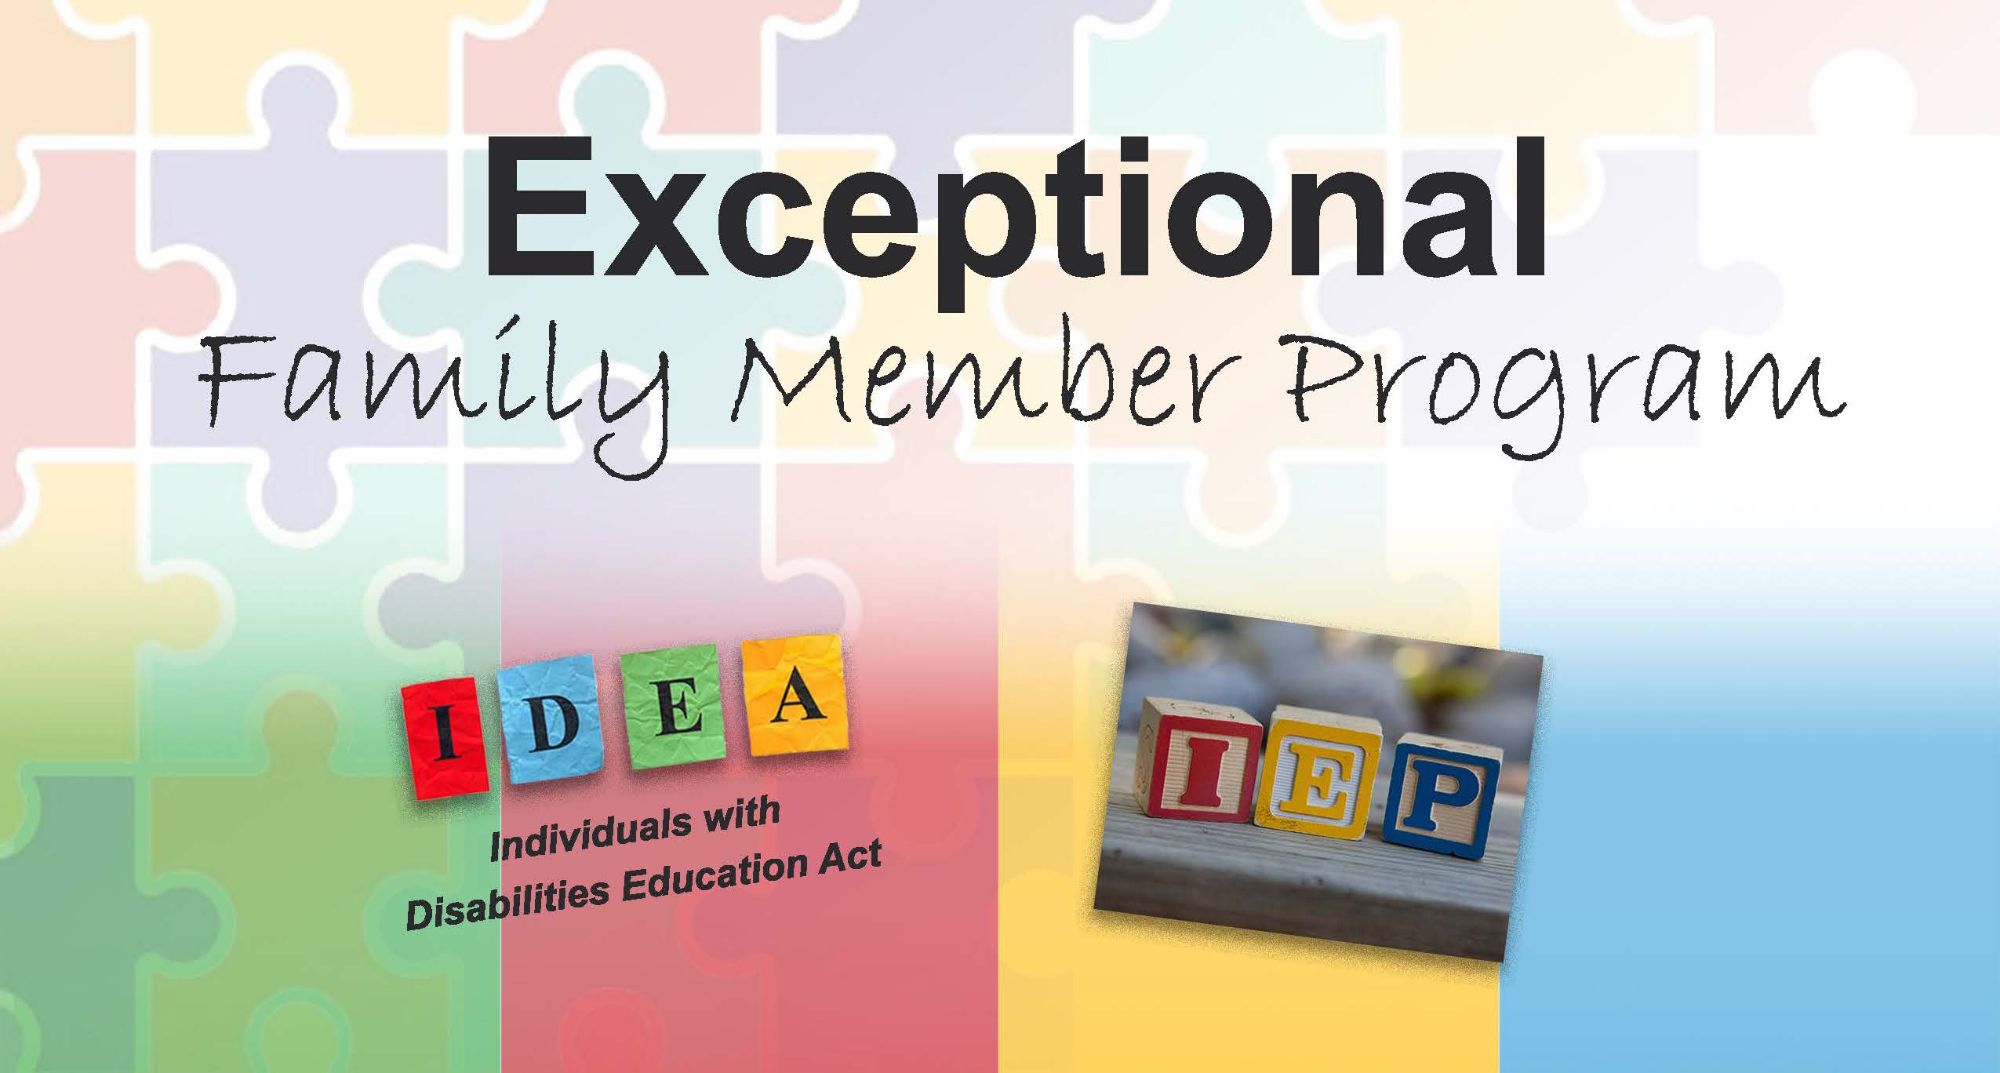 Exceptional Family Member Program: IDEA (Individuals with Disabilities Education Act) and IEP